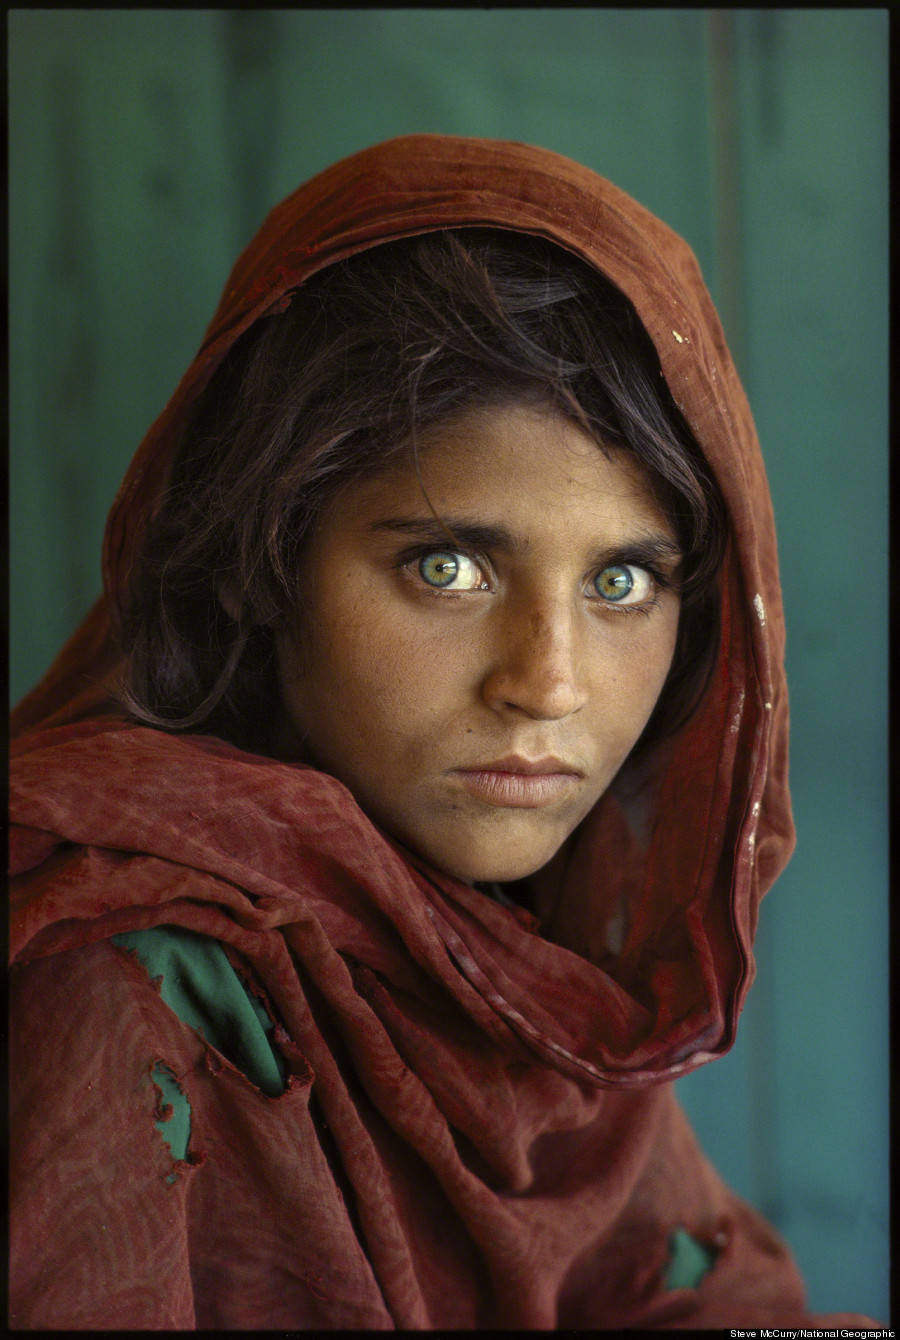 http://i.huffpost.com/gen/1425850/thumbs/o-STEVE-MCCURRY-NATIONAL-GEOGRAPHIC-900.jpg?1